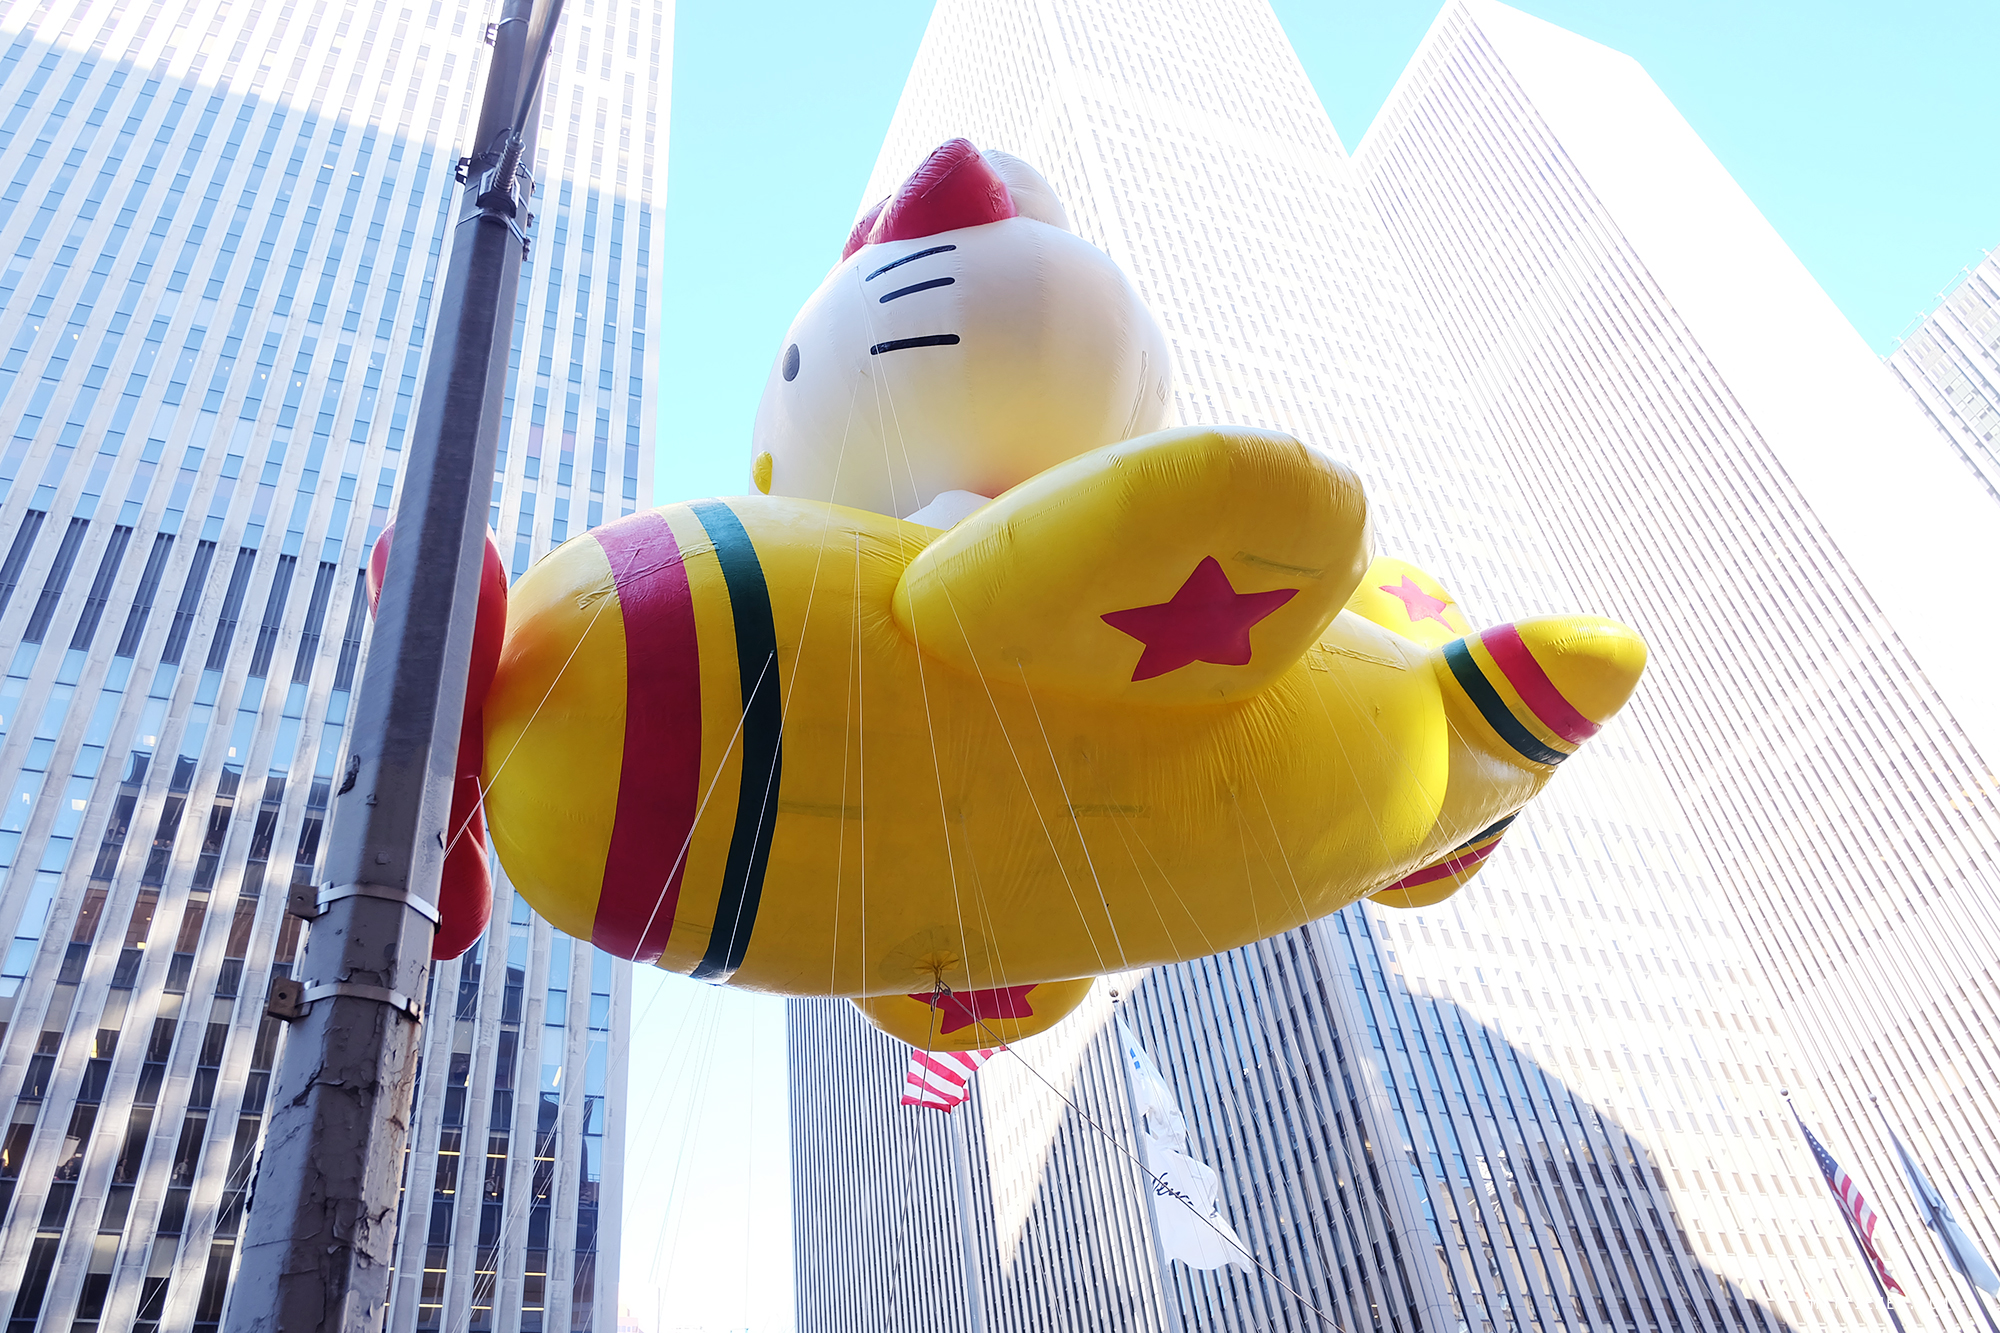 Macy's Thanksgiving Day Parade, New York